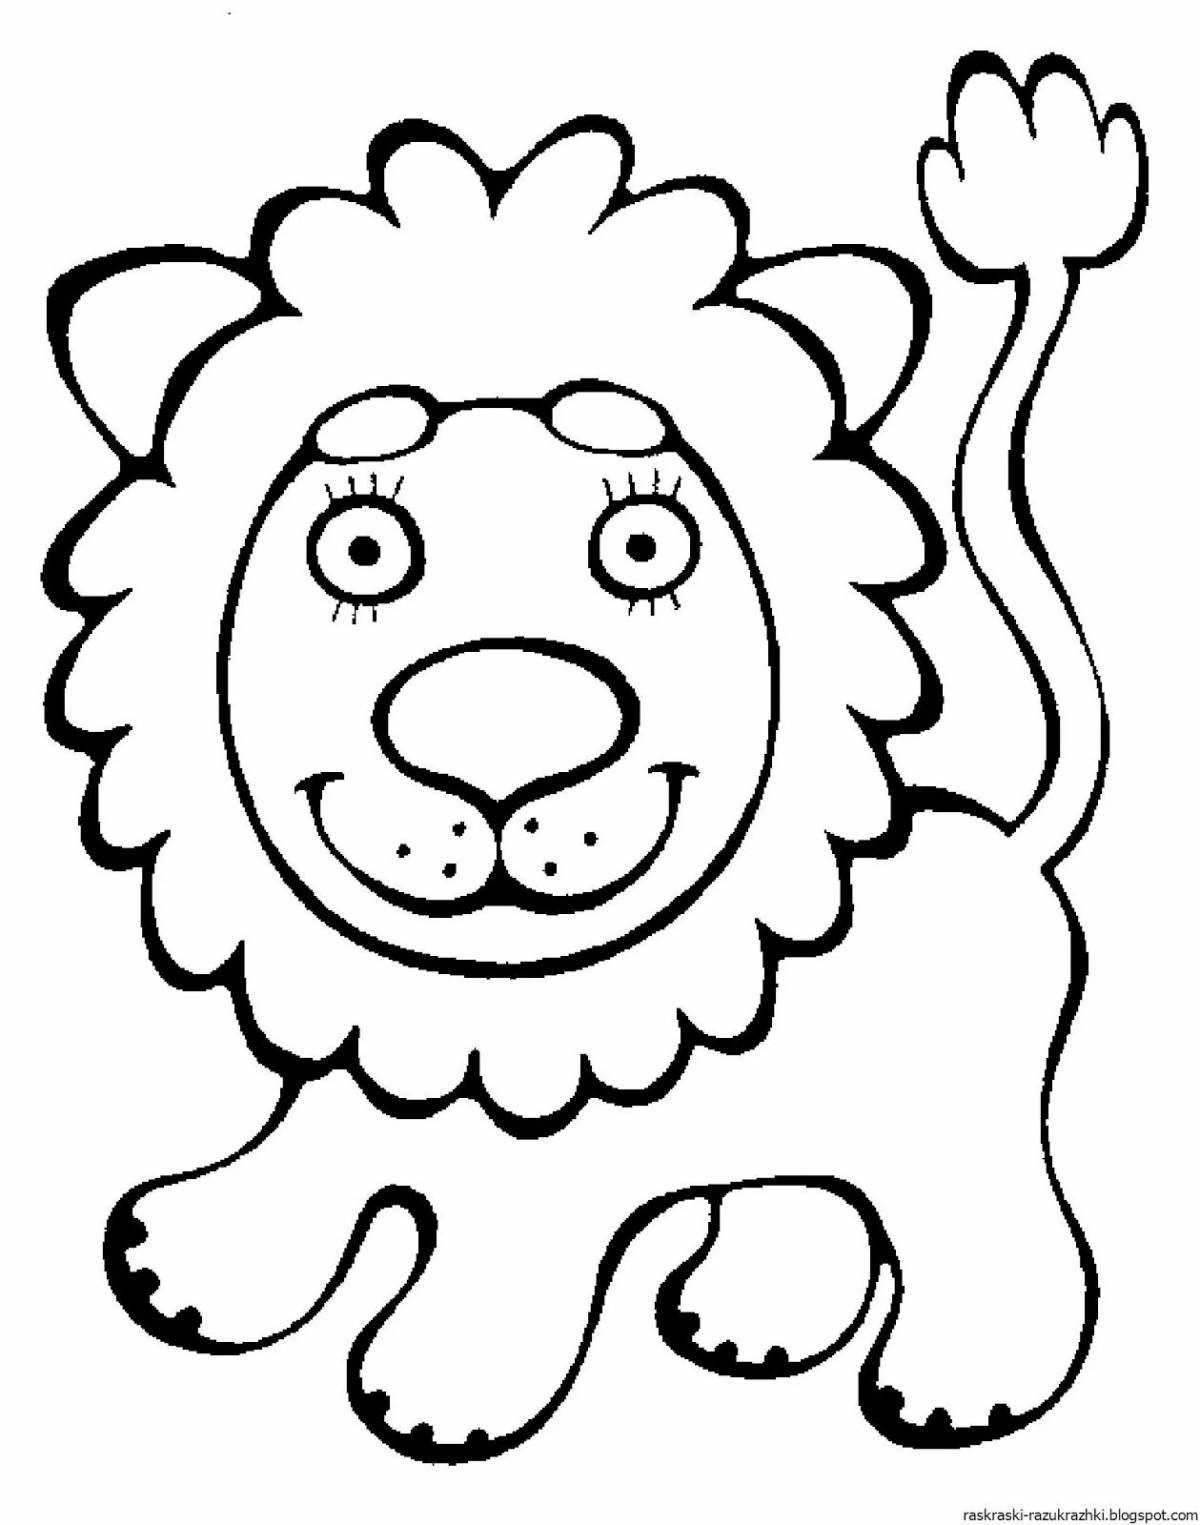 Amazing animal coloring pages for 3 year olds